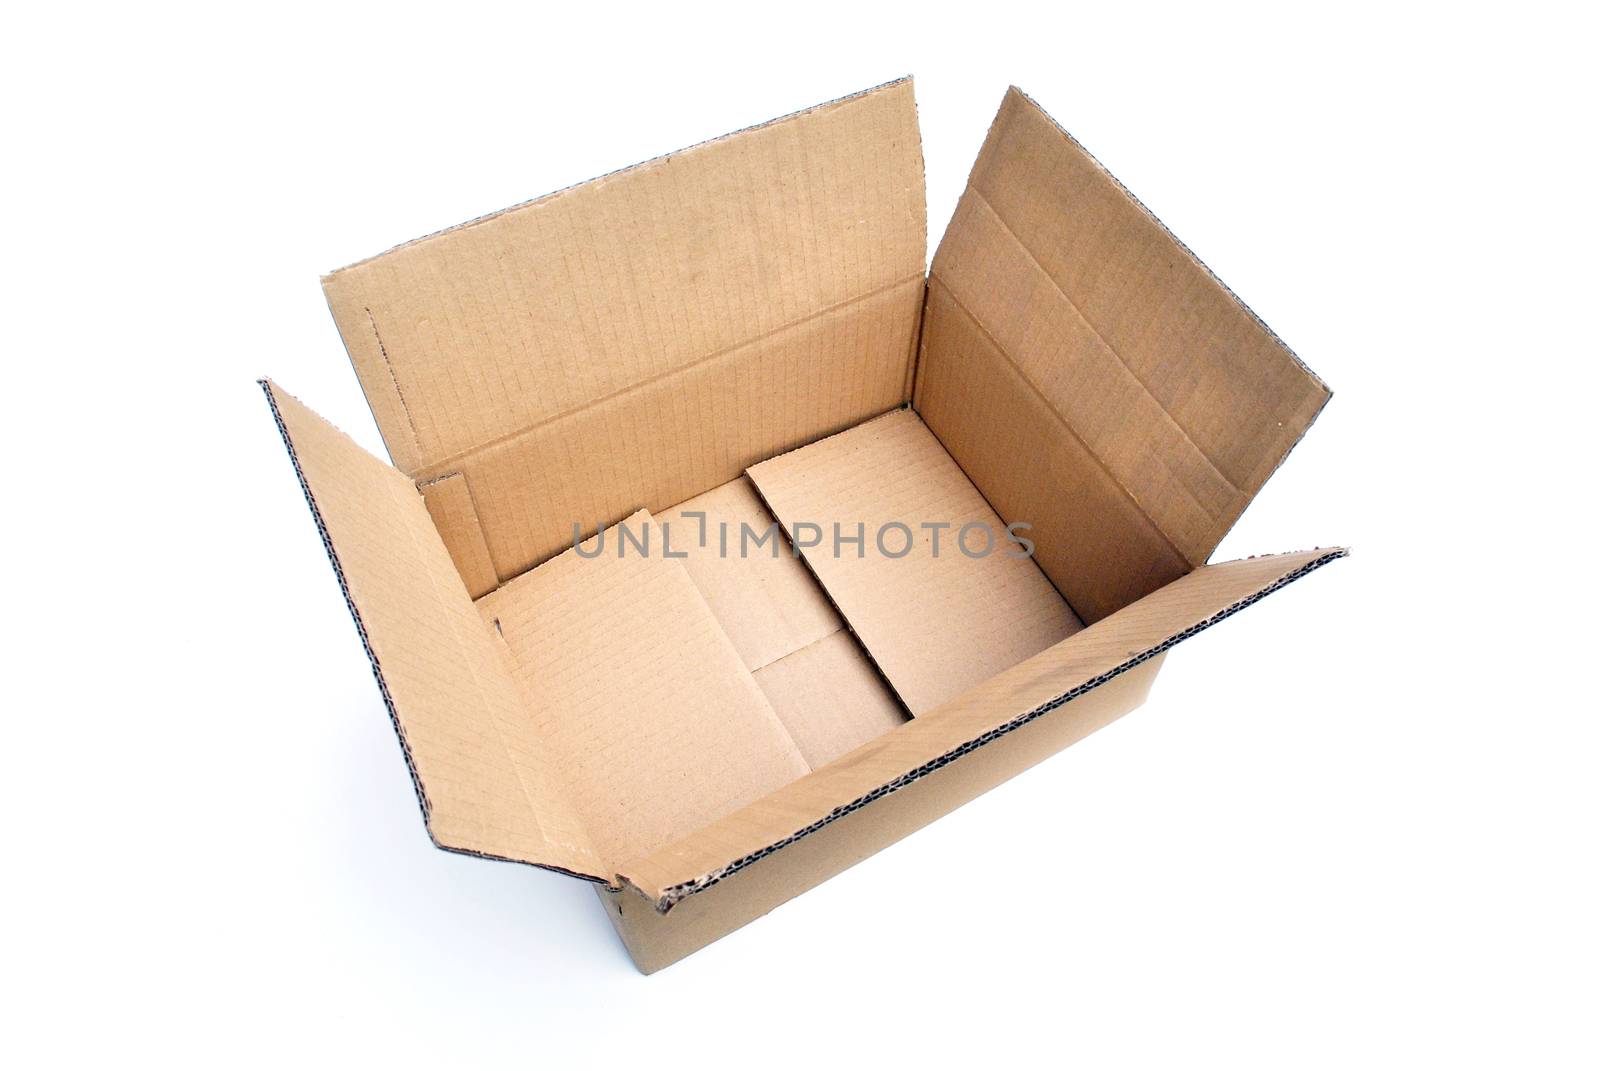 A Isolated Photo of an open Cardboard Box ready to be use for packaging